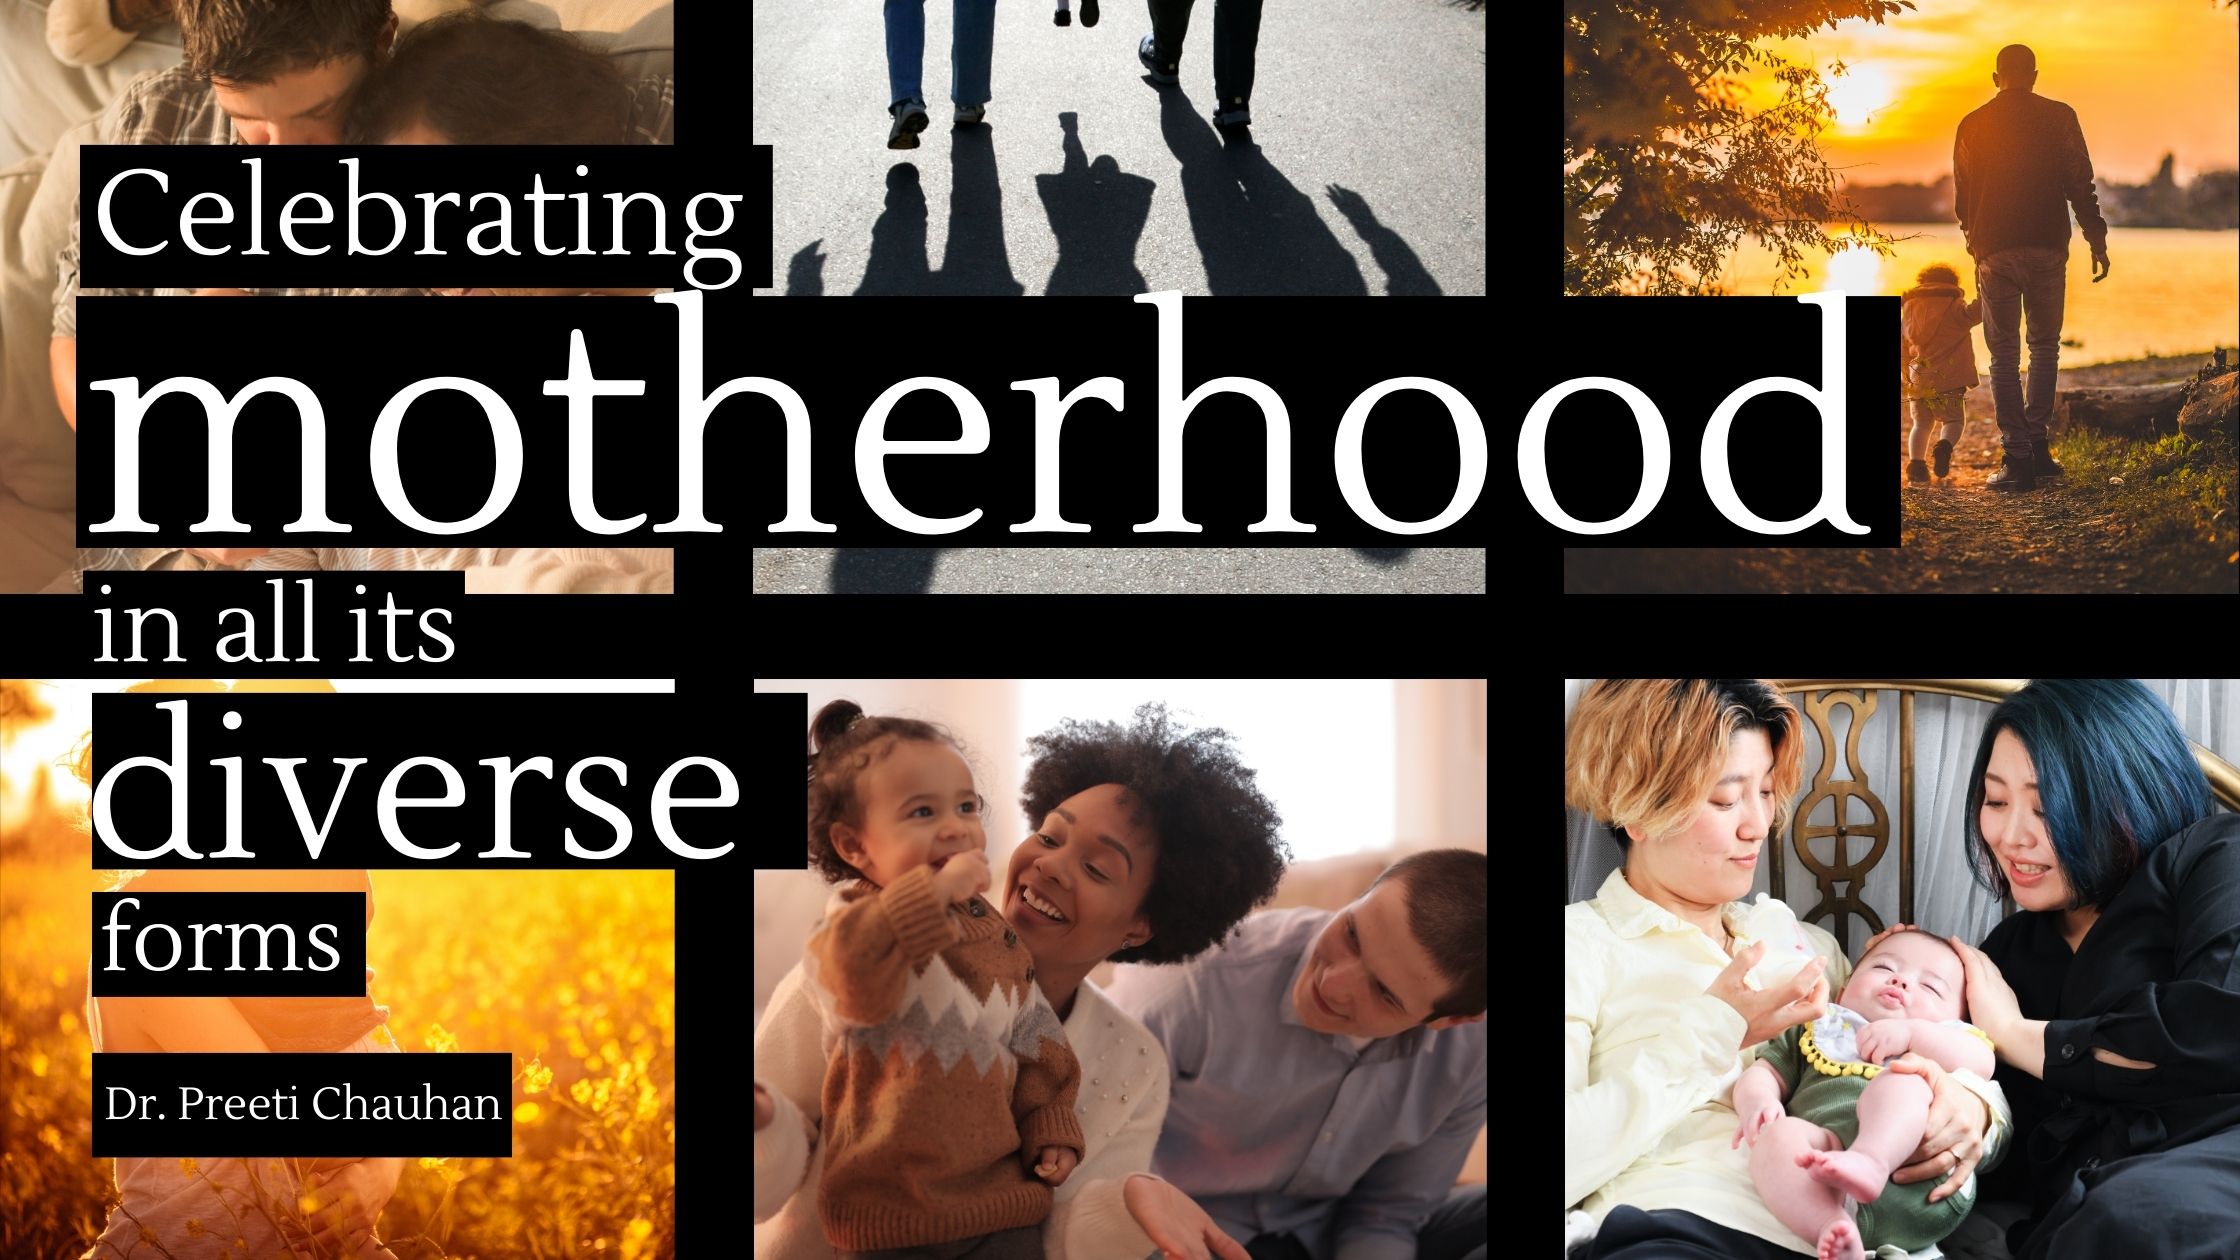 Celebrating Motherhood in all its diverse forms